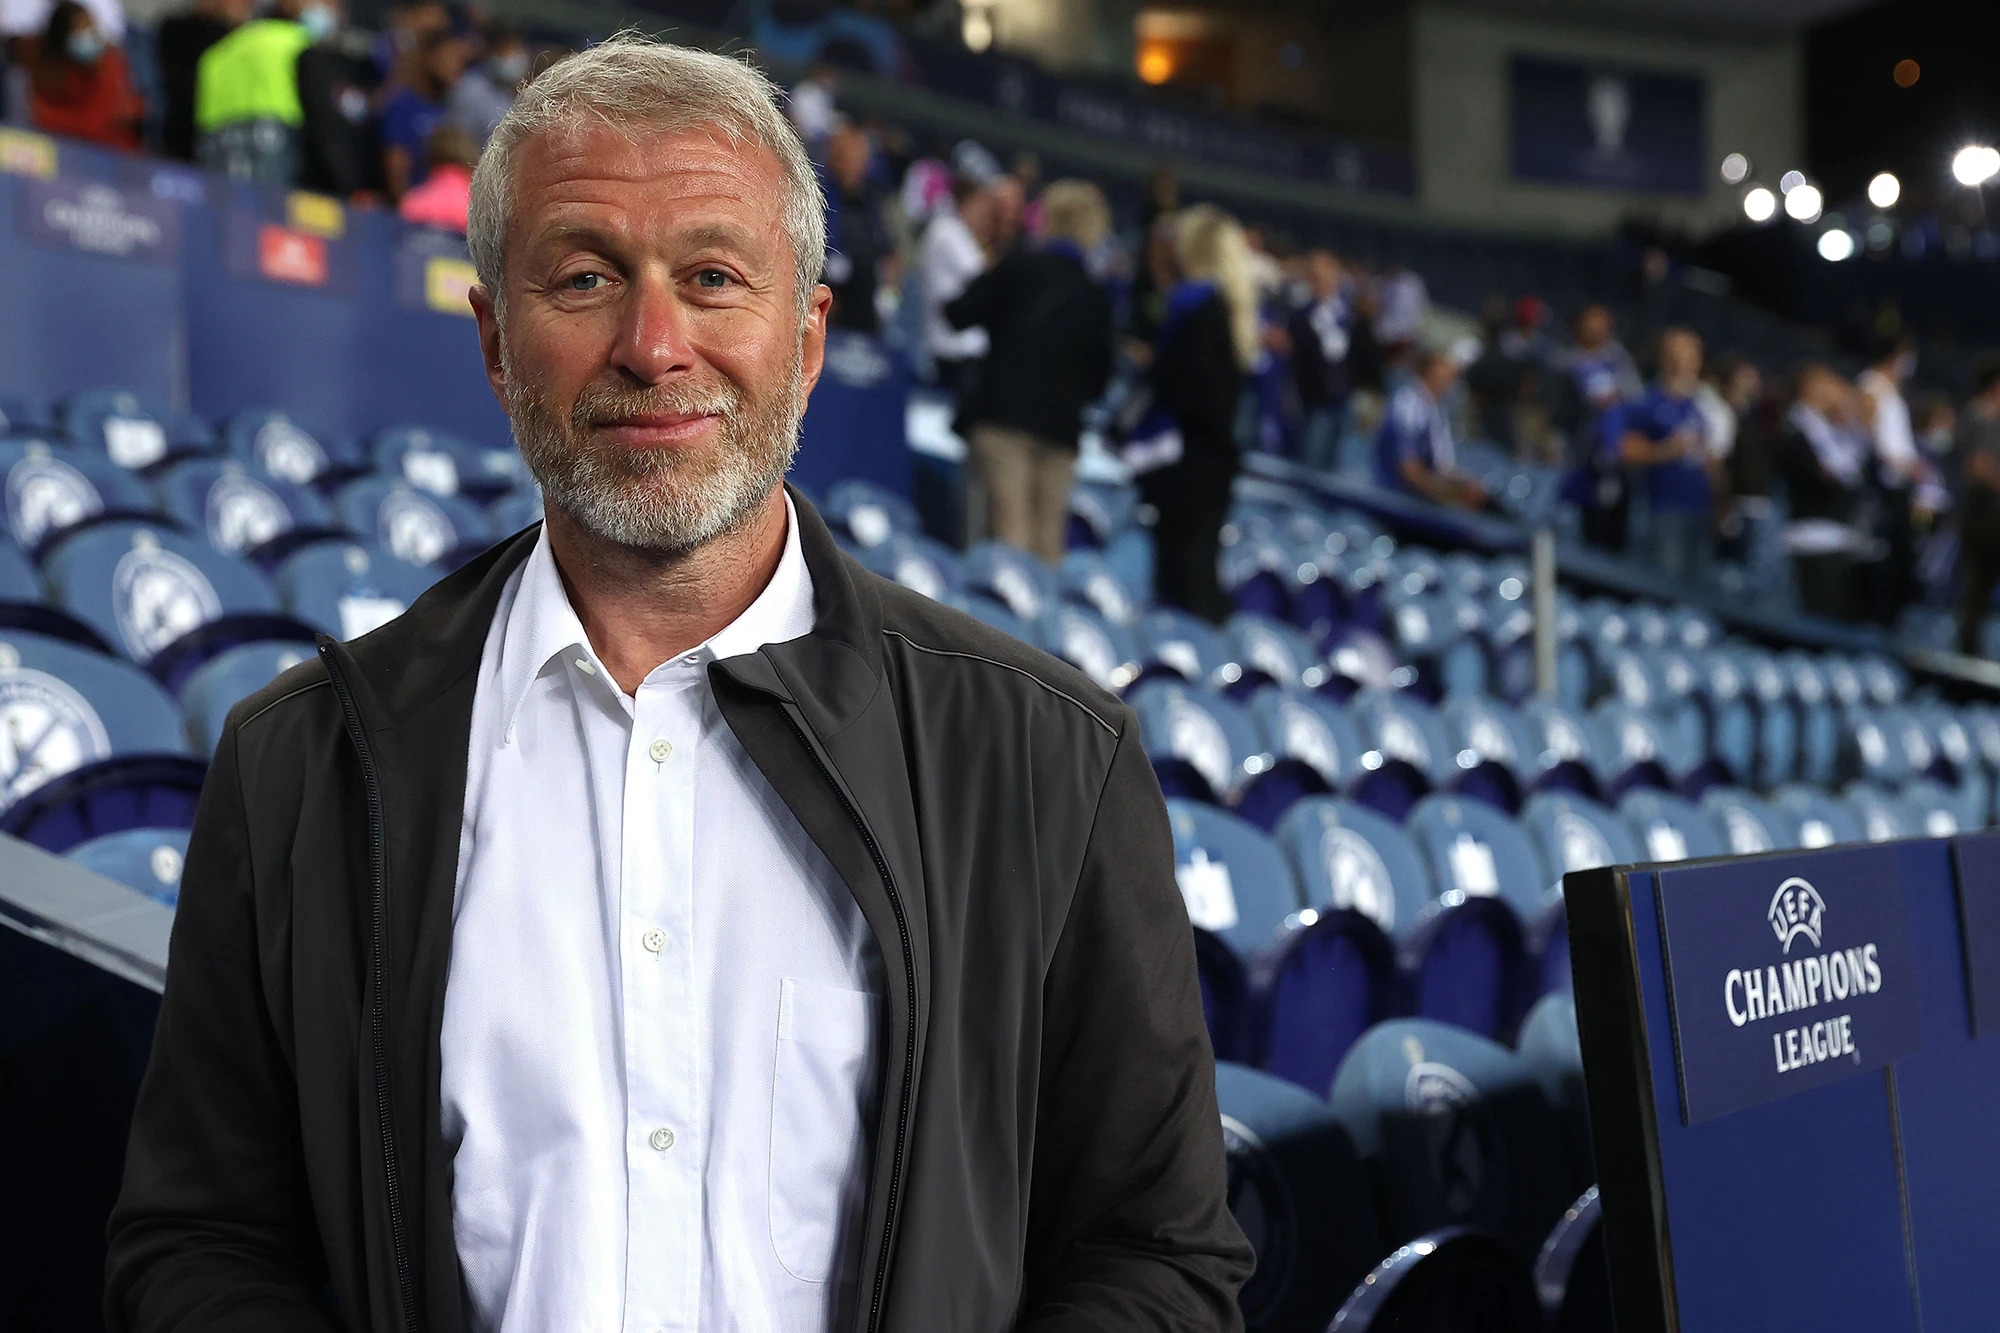 Chelsea Football Club owner Roman Abramovich and two Ukrainian negotiators were reportedly poisoned during peace talks in Kyiv on March 3. 